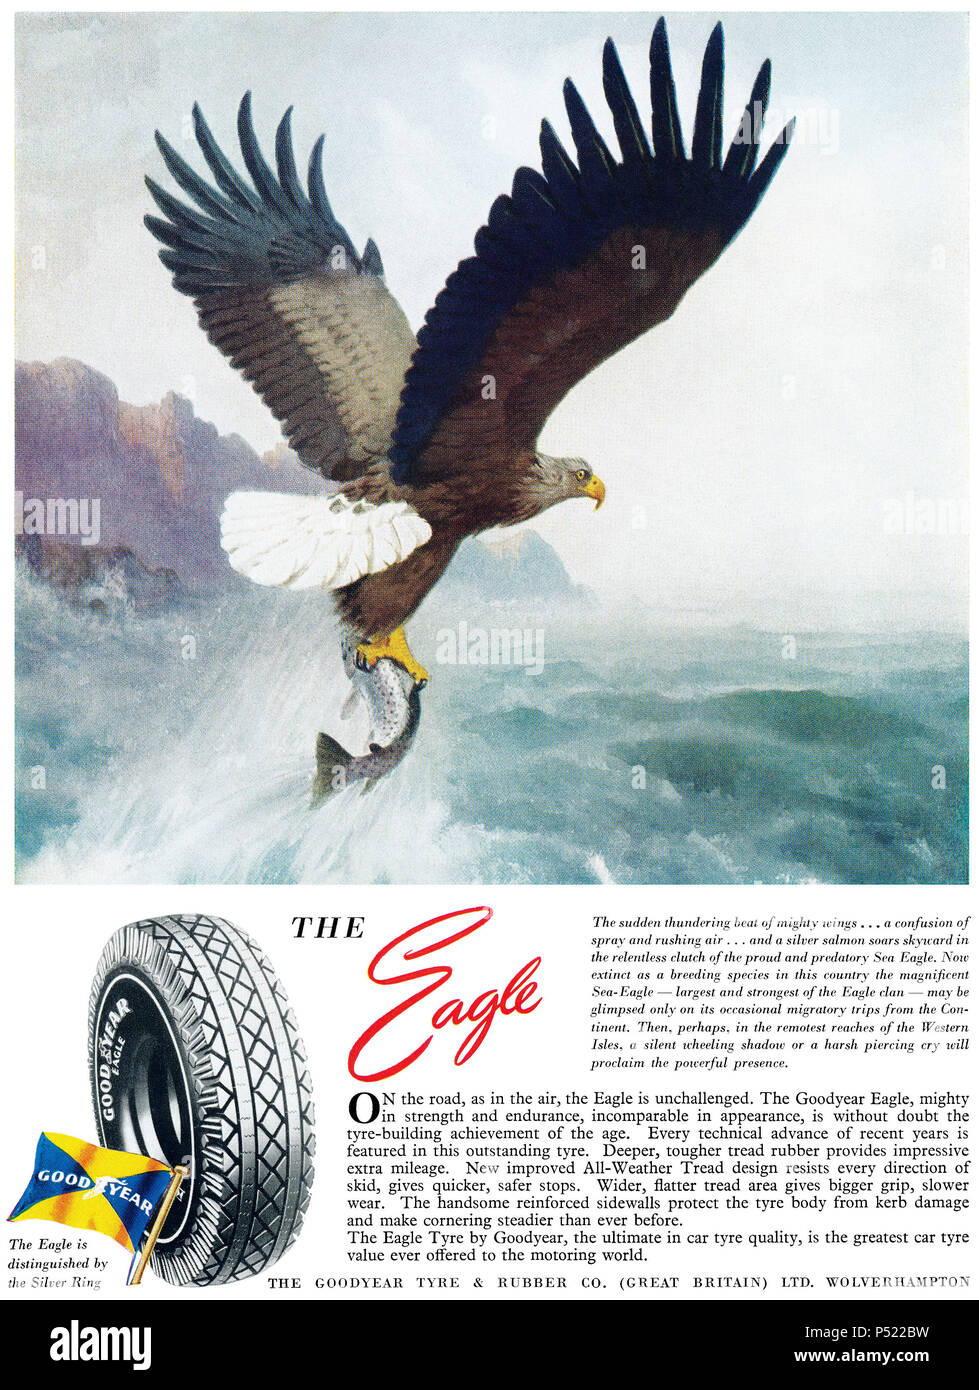 1952 British advertisement for Goodyear Eagle tyres. Stock Photo